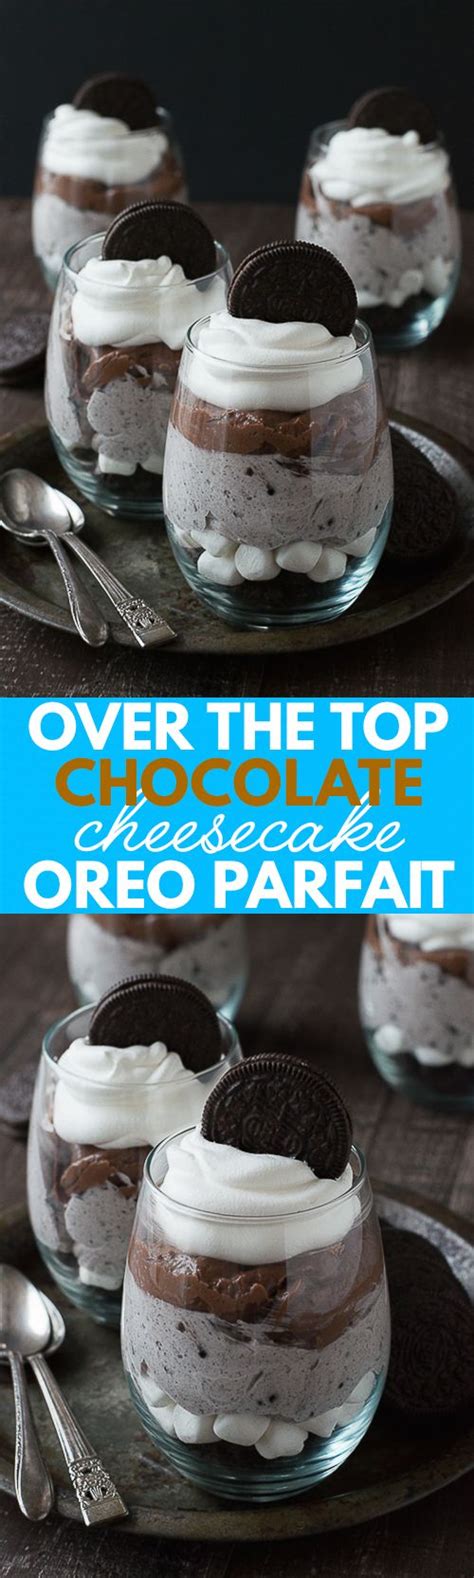 Upgrade your standard cheesecake with this oreo cheesecake recipe from delish.com. Over the Top Chocolate Cheesecake Oreo Parfaits - this is ...